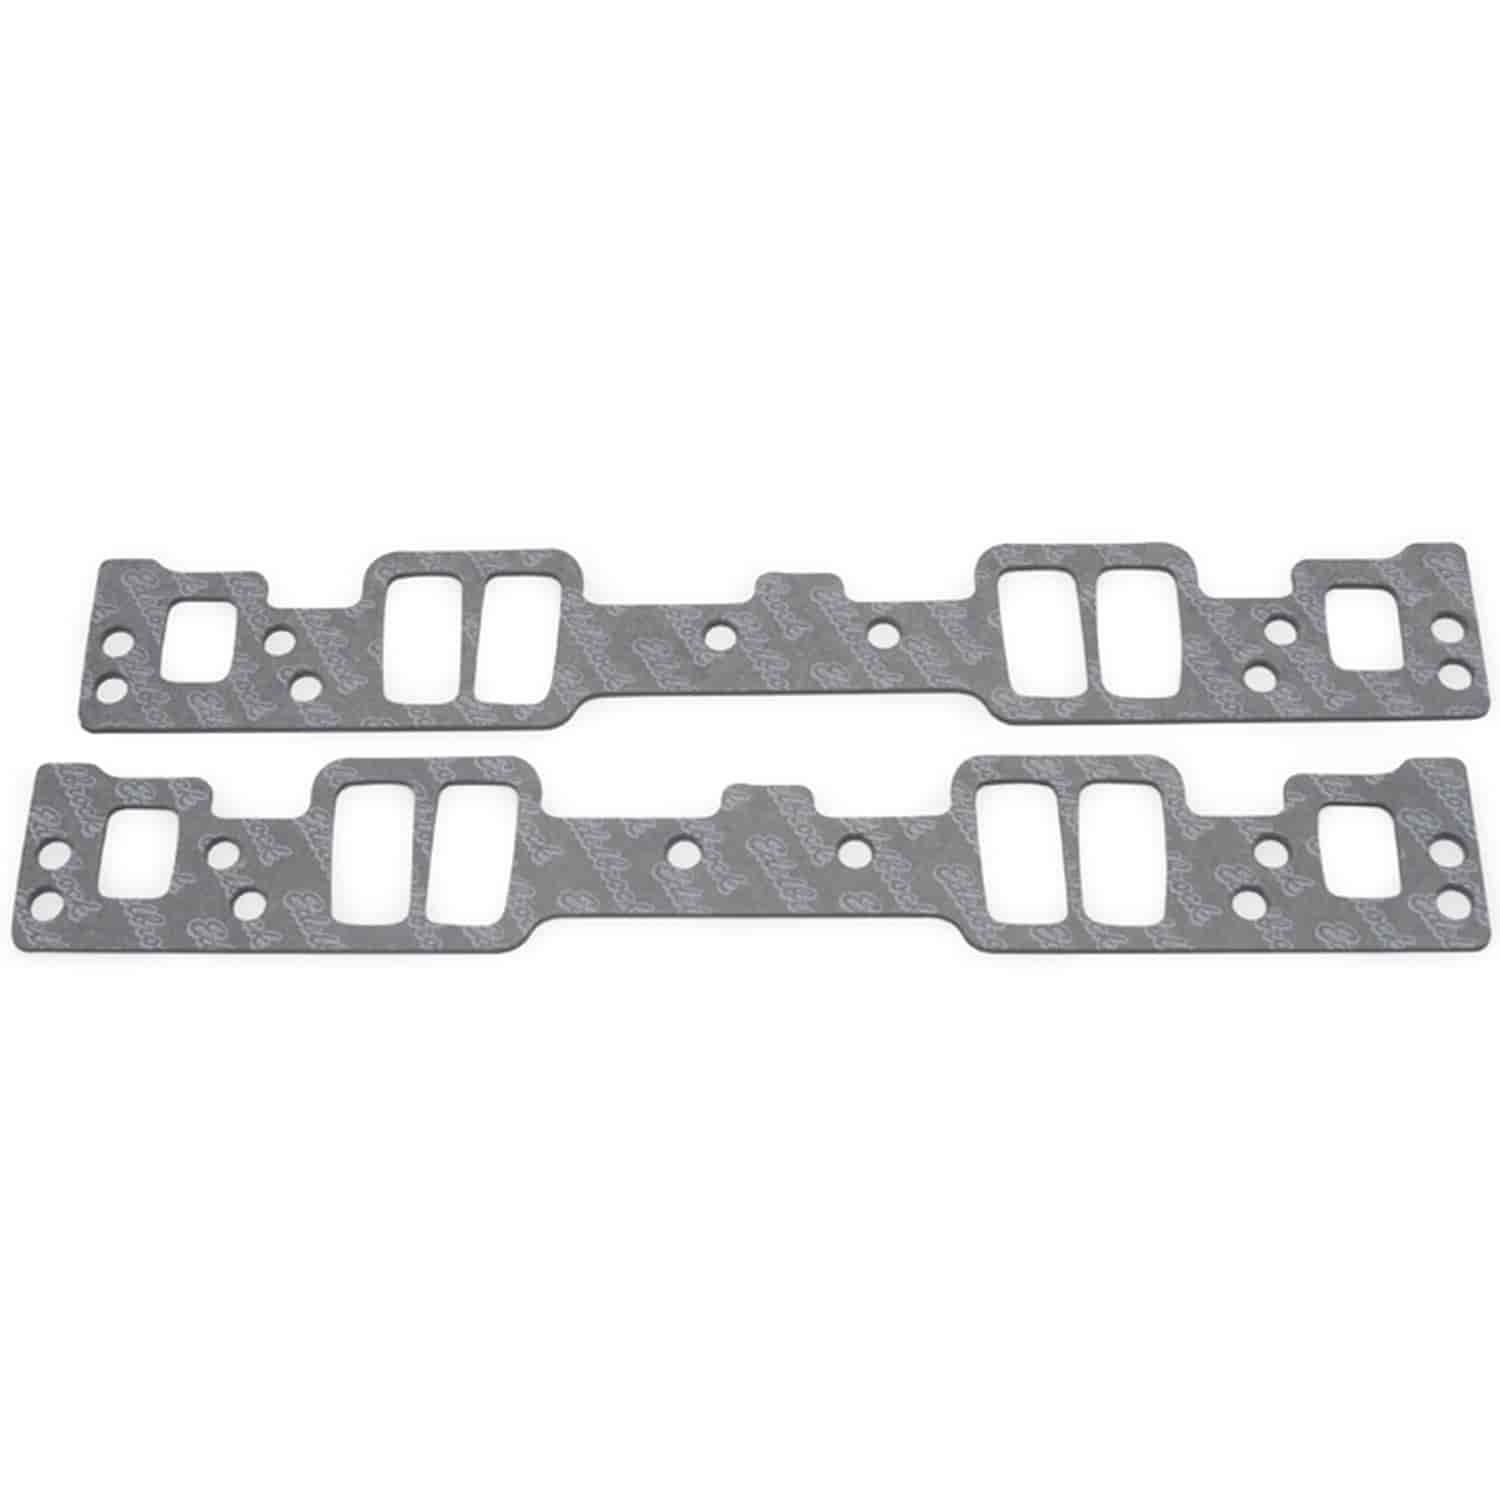 Intake Gaskets for Small Block Chevy with E-Tec 170 Heads